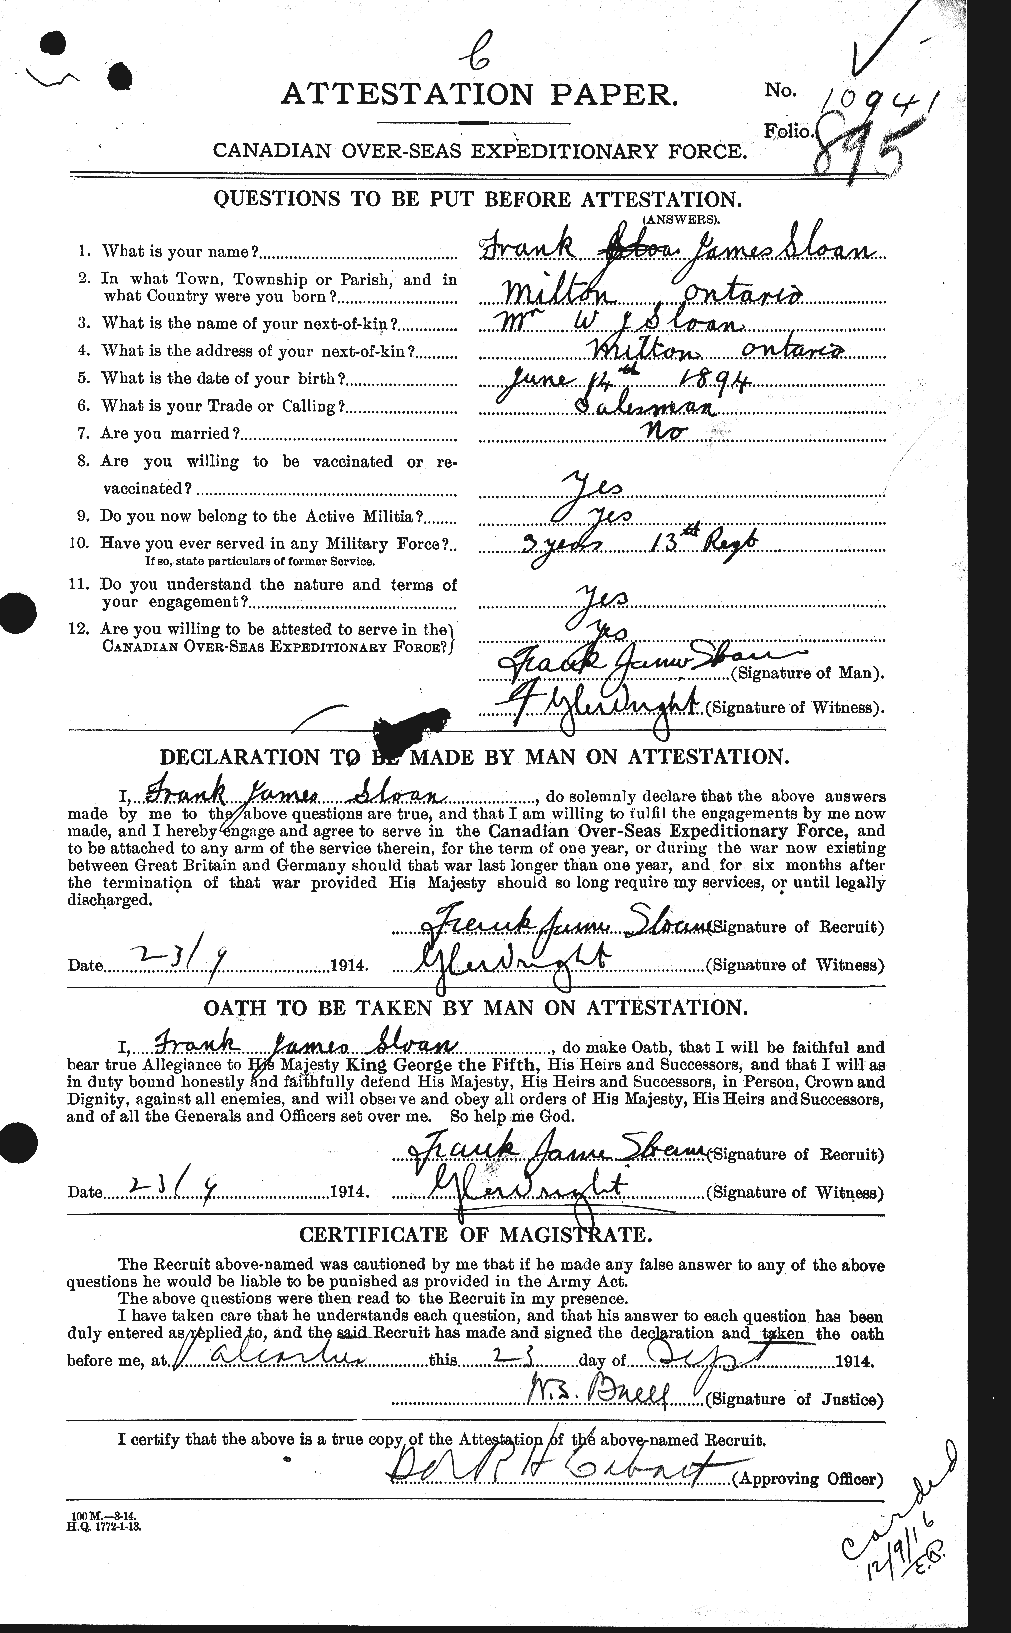 Personnel Records of the First World War - CEF 099088a